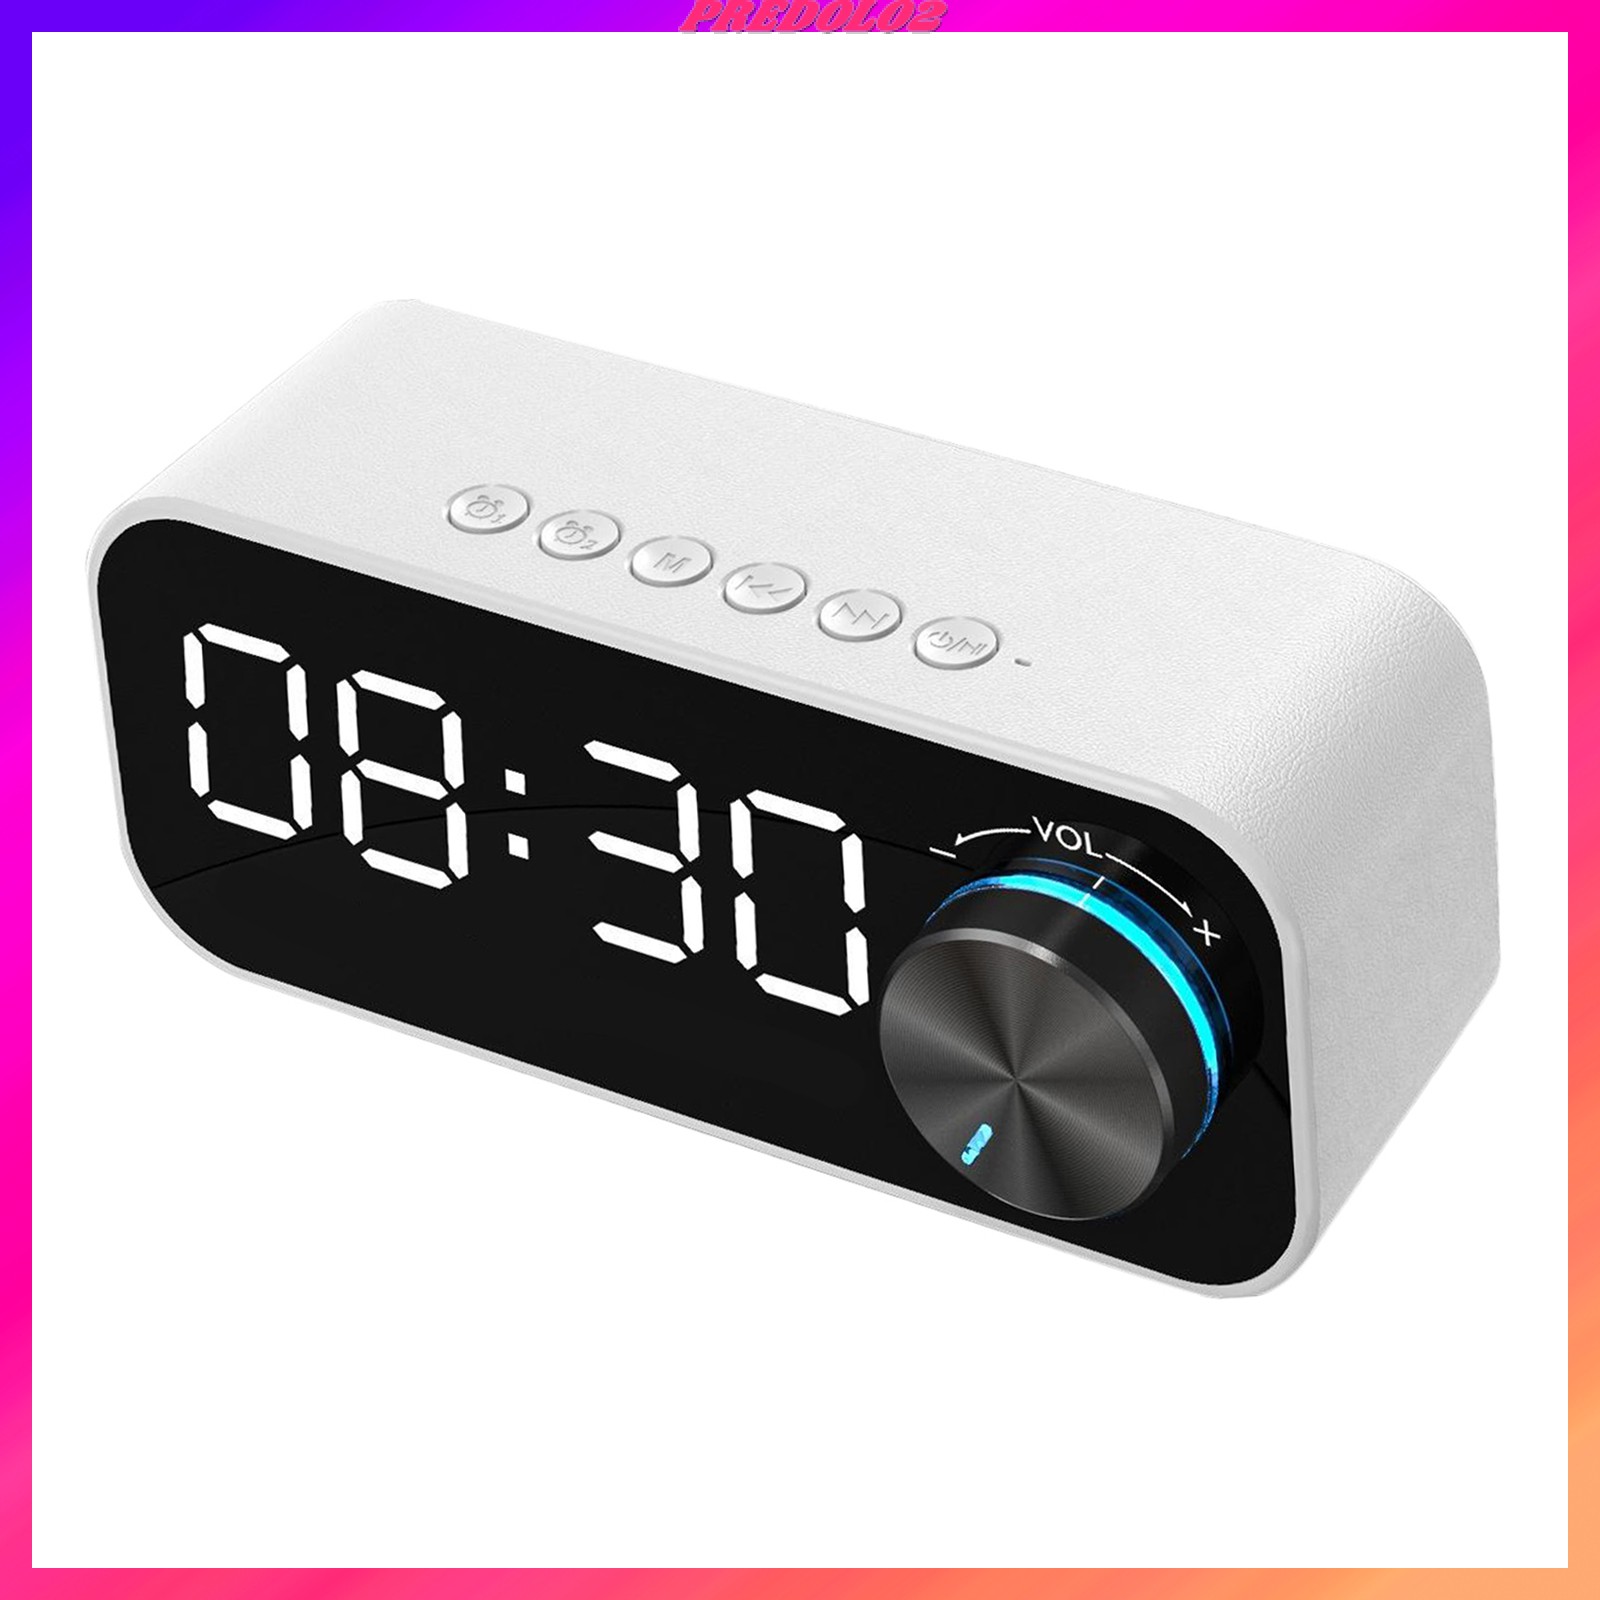 igital Alarm Clock Bedside with Bluetooth 5.0 Speaker, Sleep Timer, Snooze Function, Led Mirror Screen, ual Alarms,and USB Charge Port